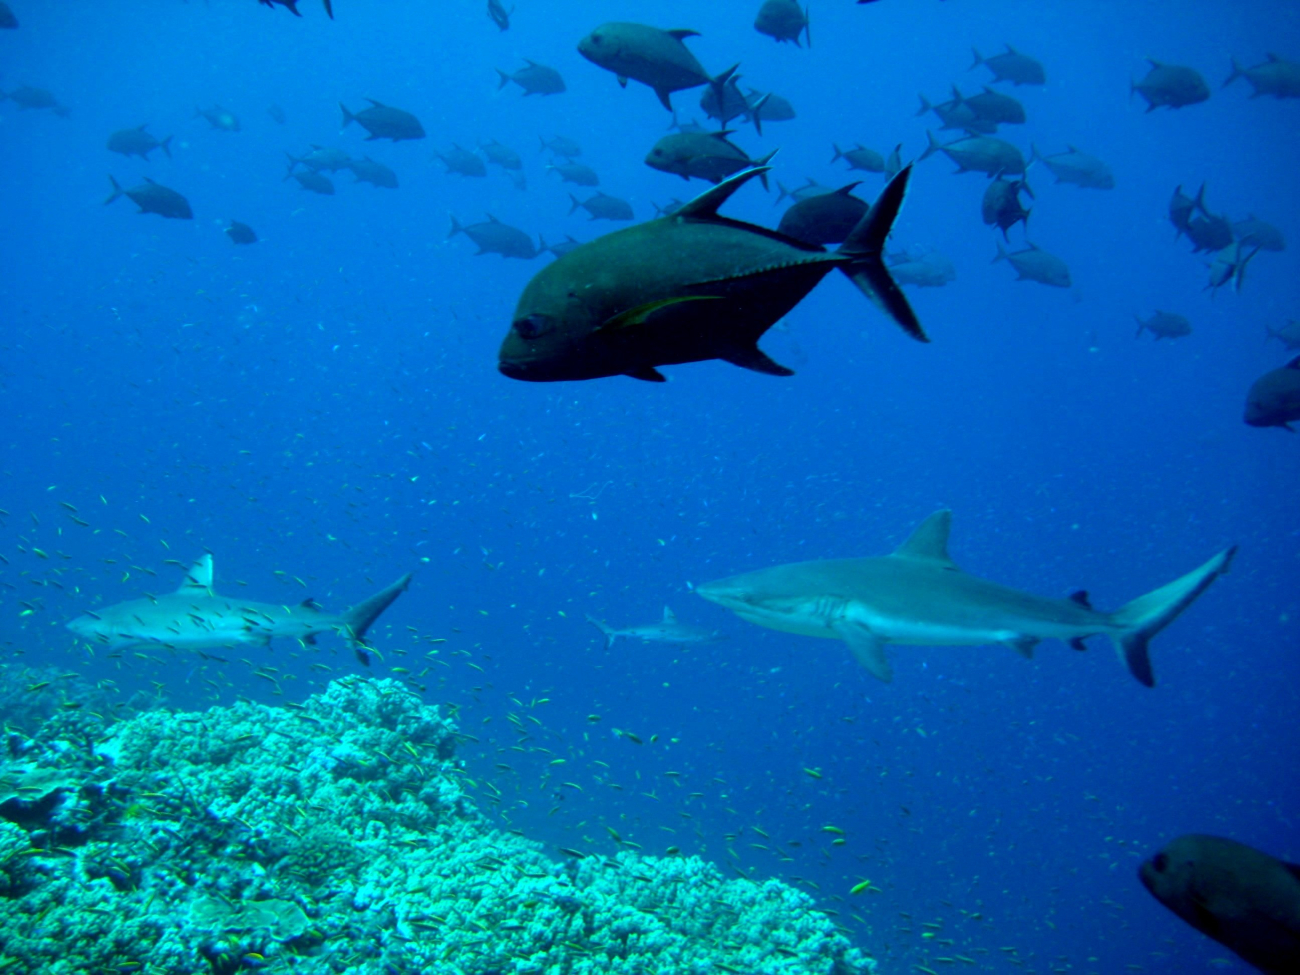 Giant trevally and gray reef sharks over reef